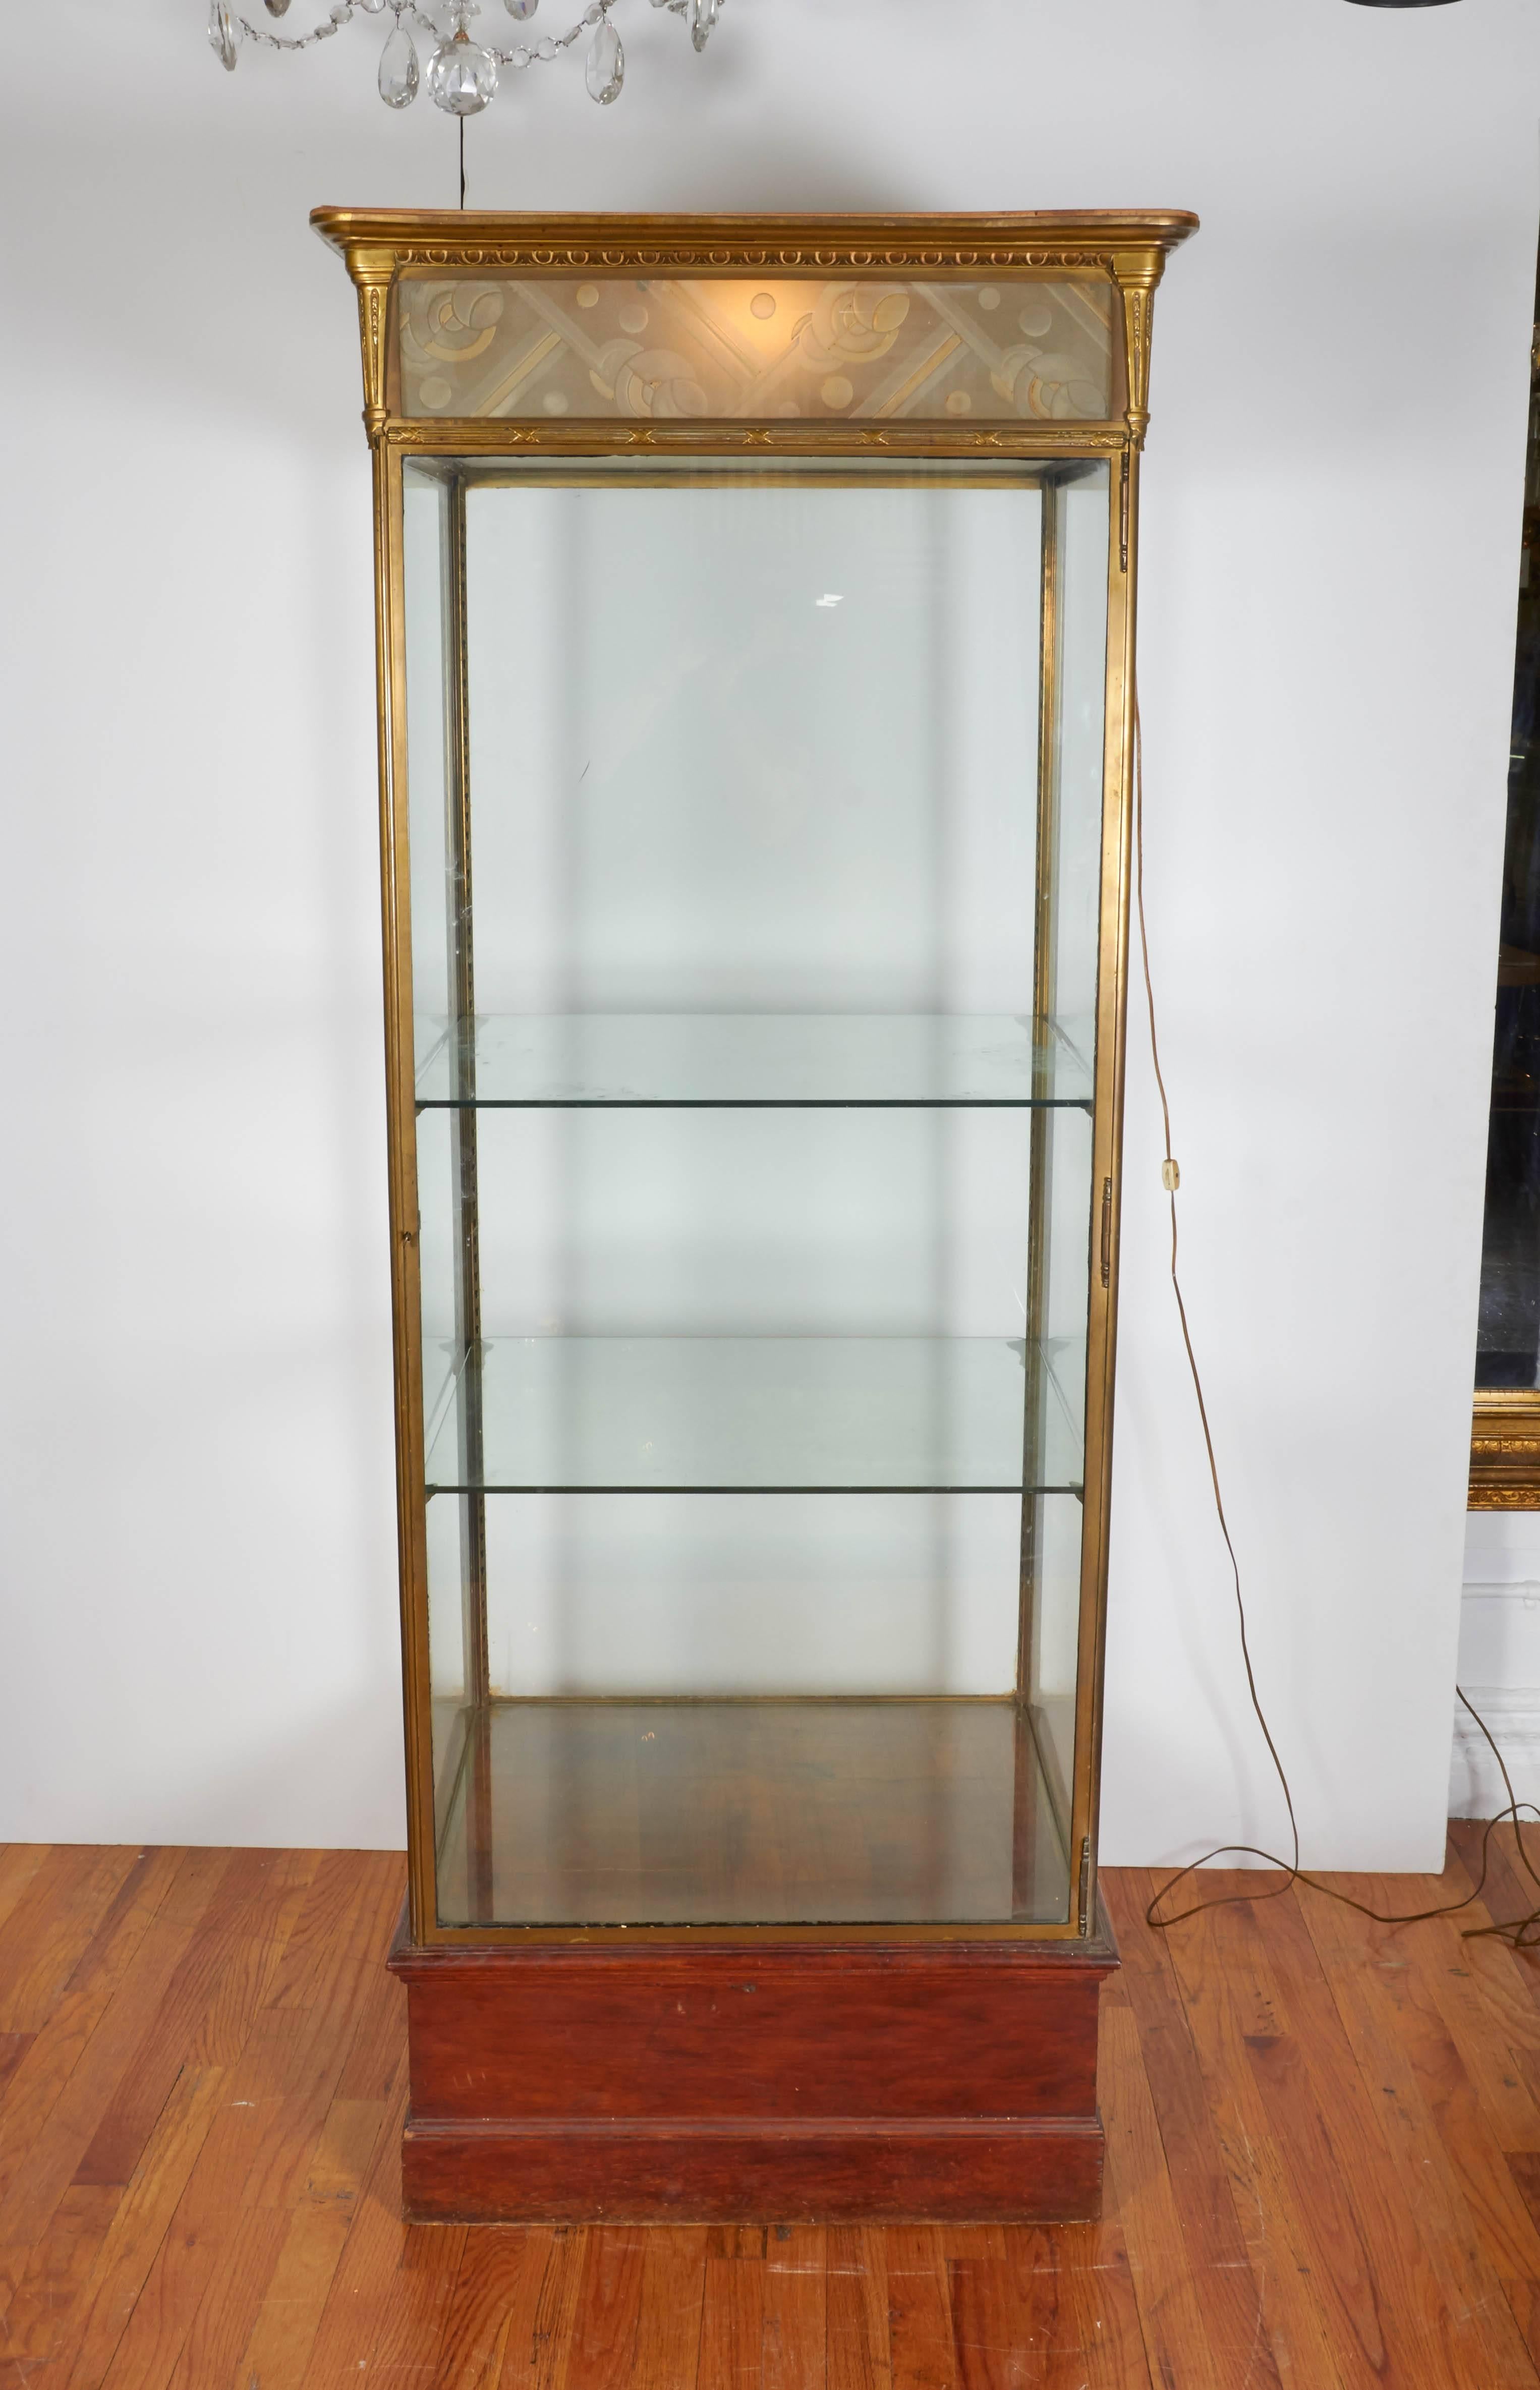 Art Deco era illuminated vitrine and showcase display, circa 1930s, with single door, glass sided against a brass frame with classical elements, decorative frosted and etched glass panels as shade, the interior with two shelves, raised on wood base.